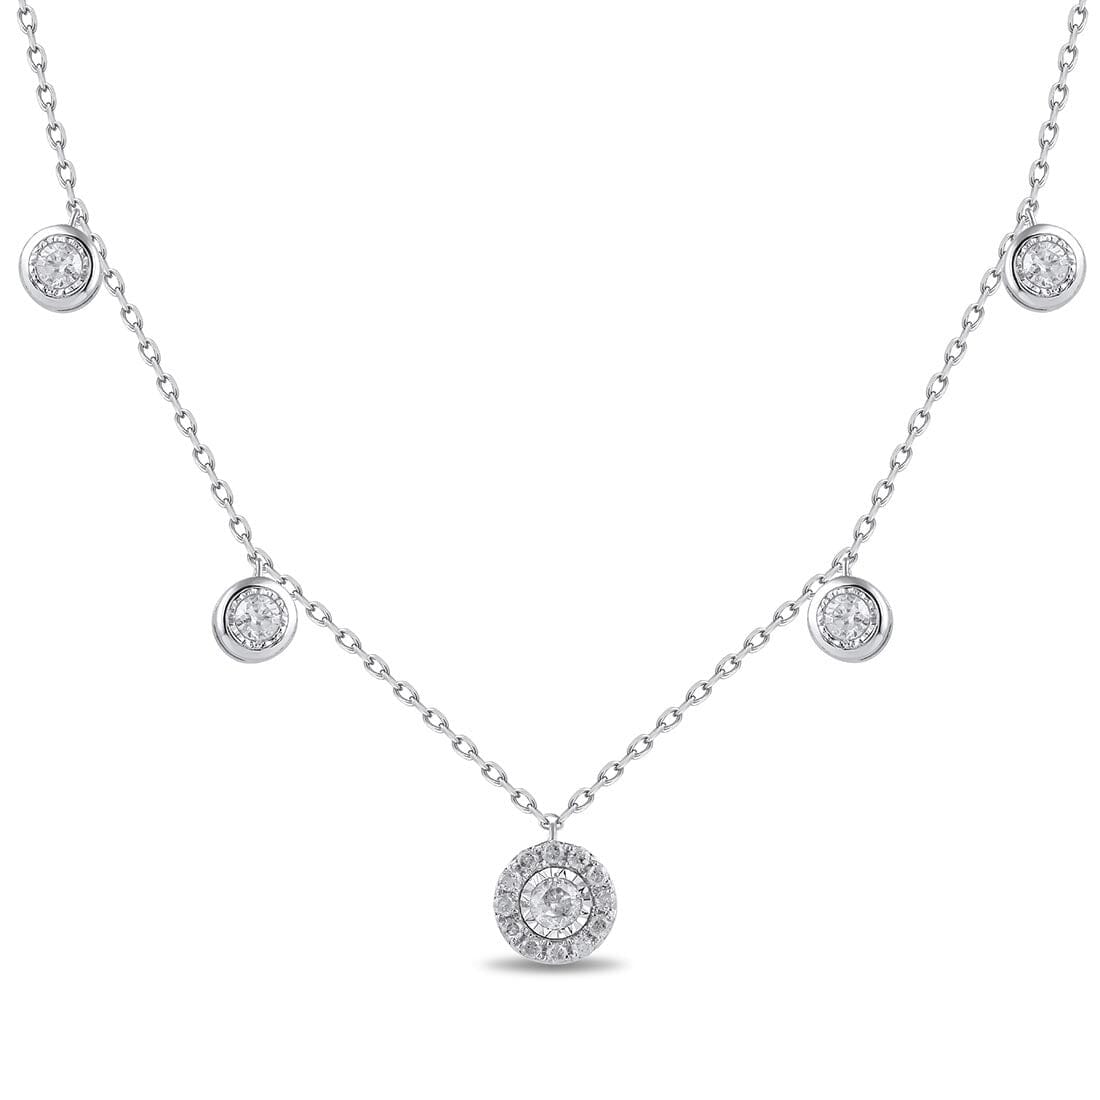 Brilliant Solitaire 4 Station Necklace with 1/2ct of Diamonds in Sterling Silver Necklaces Bevilles 